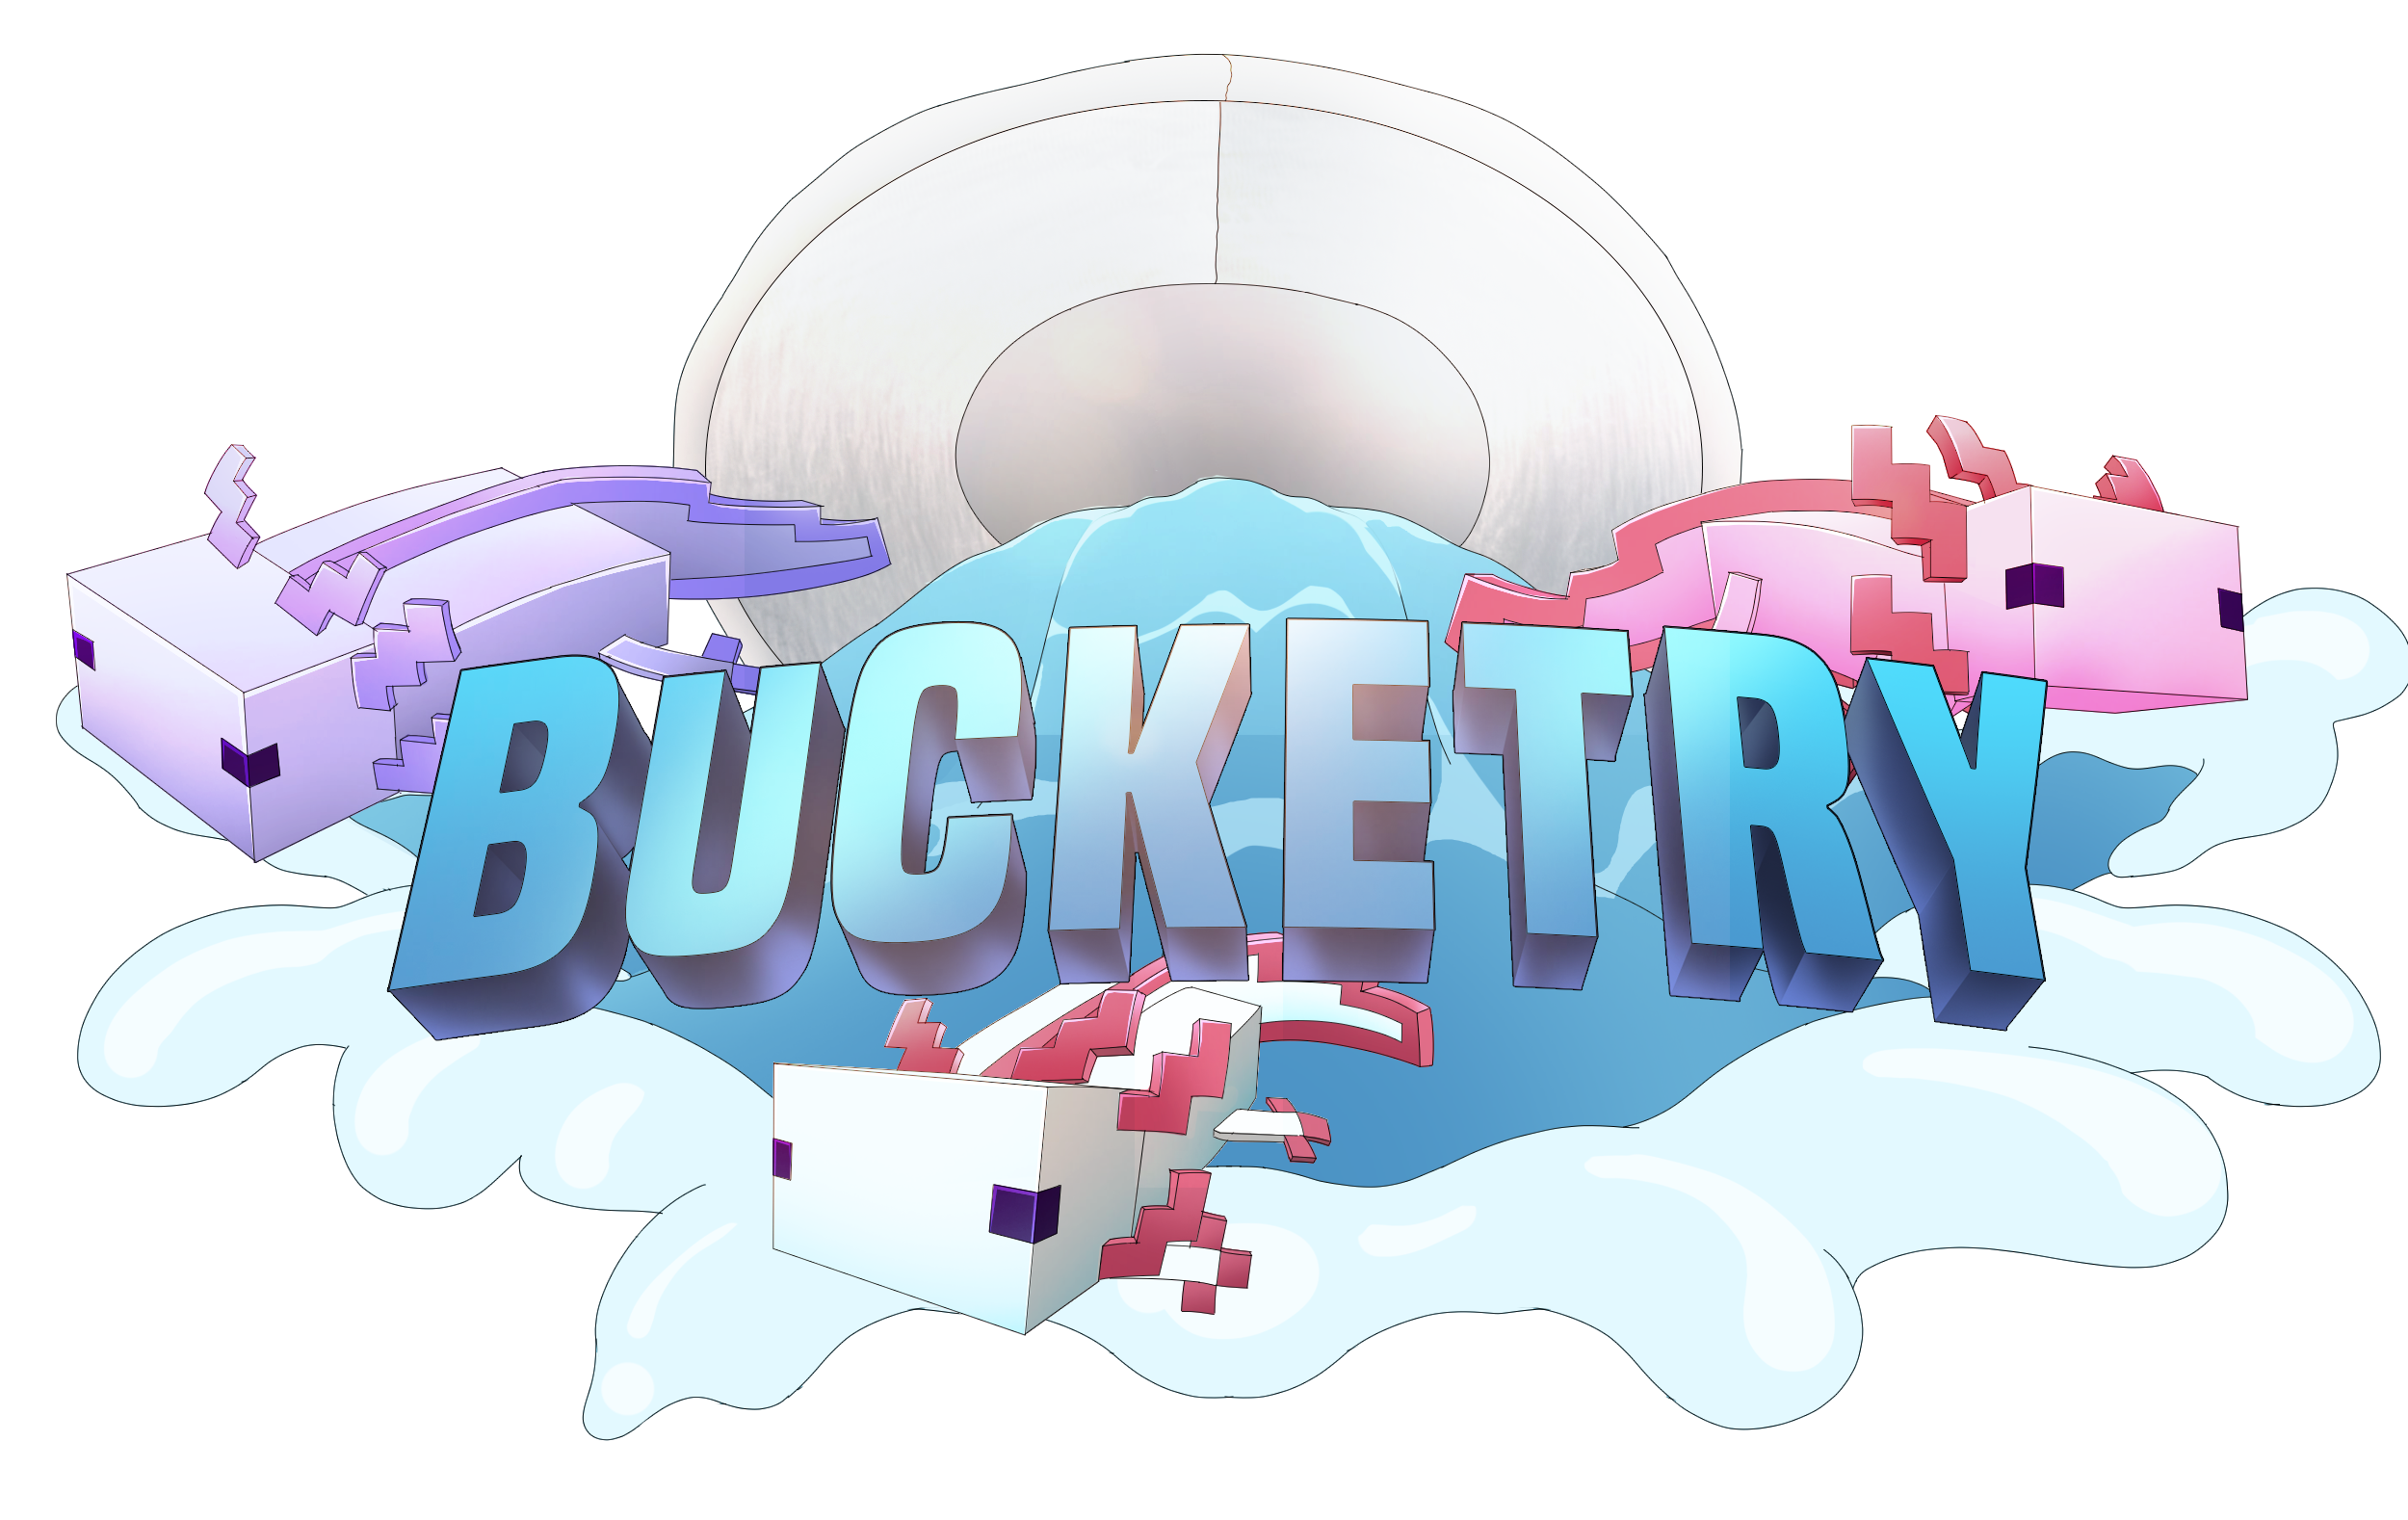 Bucketry Minecraft Survival - Custom Enchants, Shops, Ranks, Claiming, Vote/Envoy Crates, Quests, and Much More~ [1.19.2 Java] Minecraft Server